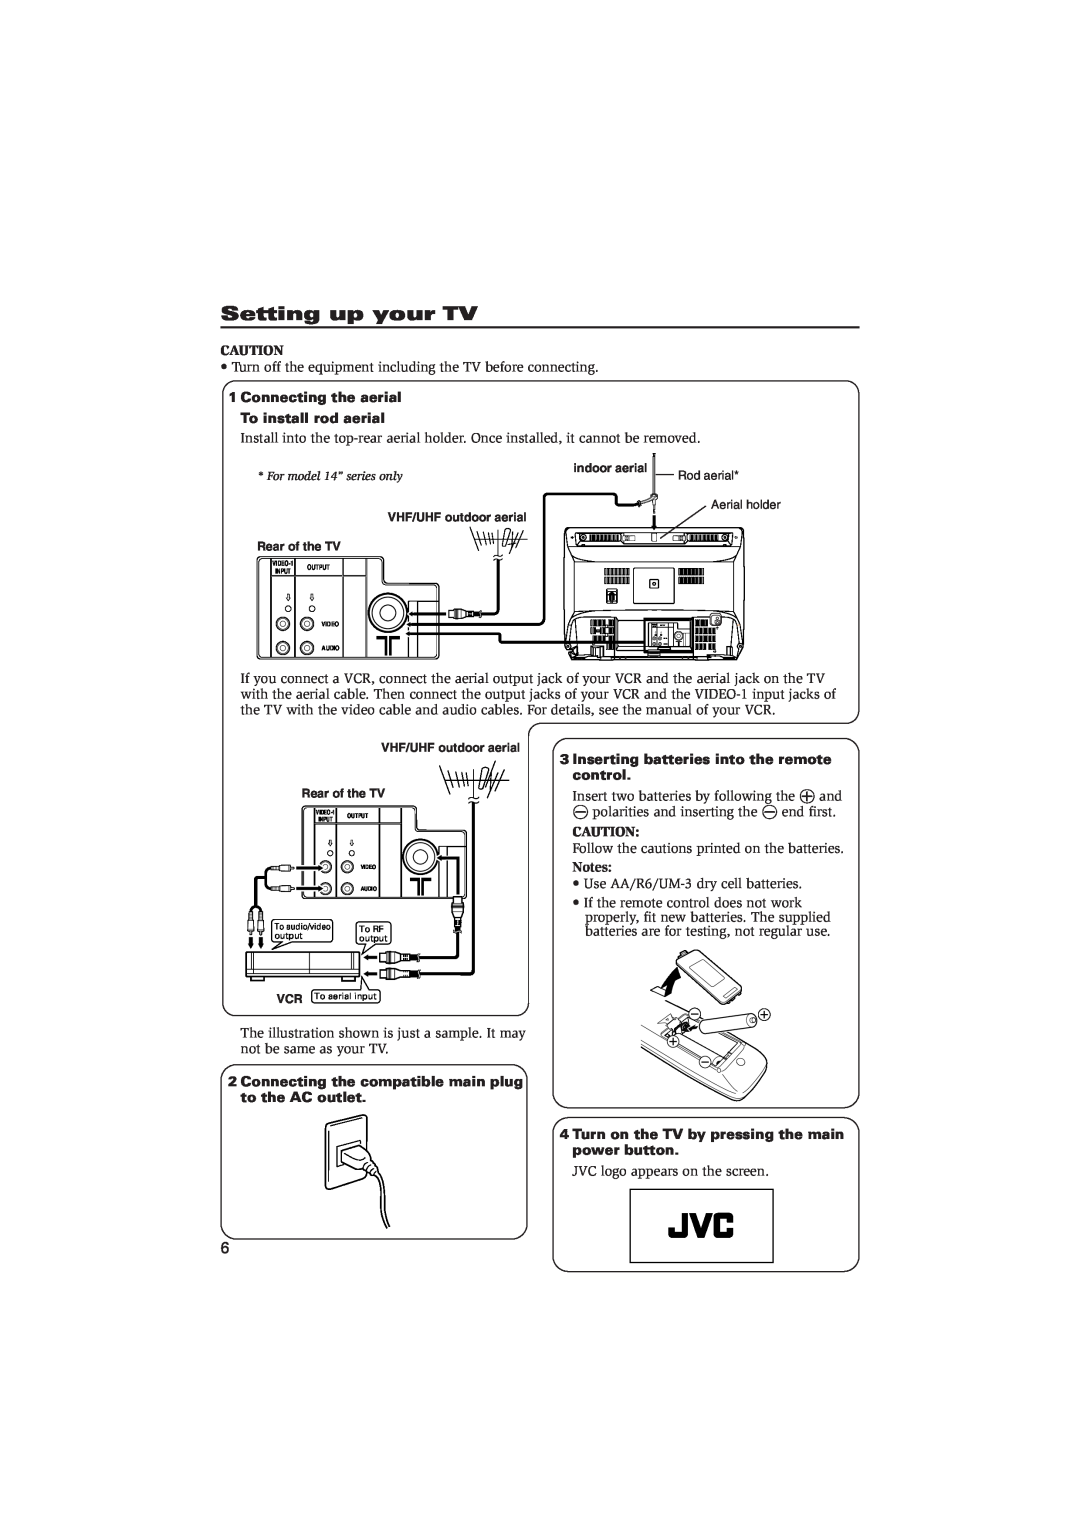 JVC AV-20NMG4 Setting up your TV, Connecting the aerial To install rod aerial, Inserting batteries into the remote control 